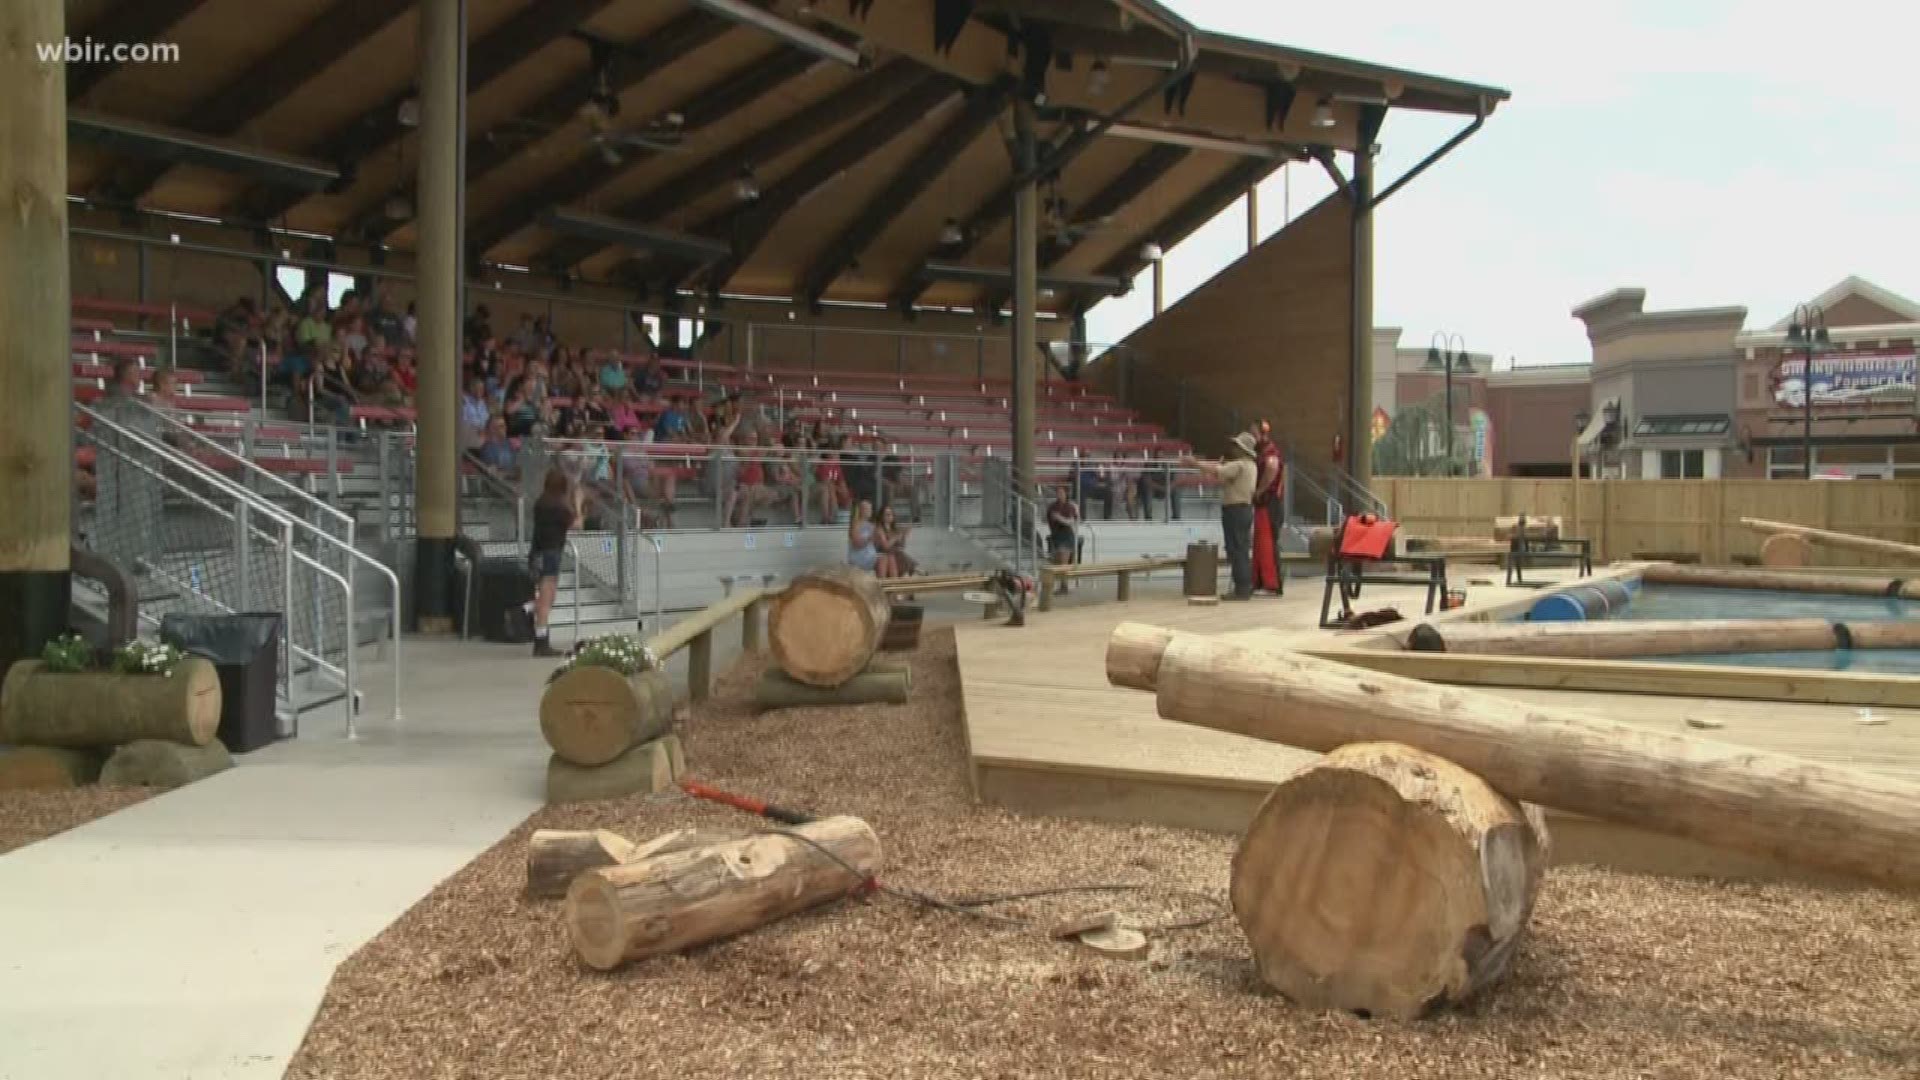 A preview of Paula Deen's Lumberjack Feud and Adventure which is set to open in Pigeon Forge. World-Class lumberjacks will compete against each other. The first public shows are set for Wednesday night, July 18, at 5:00 and 8:00.